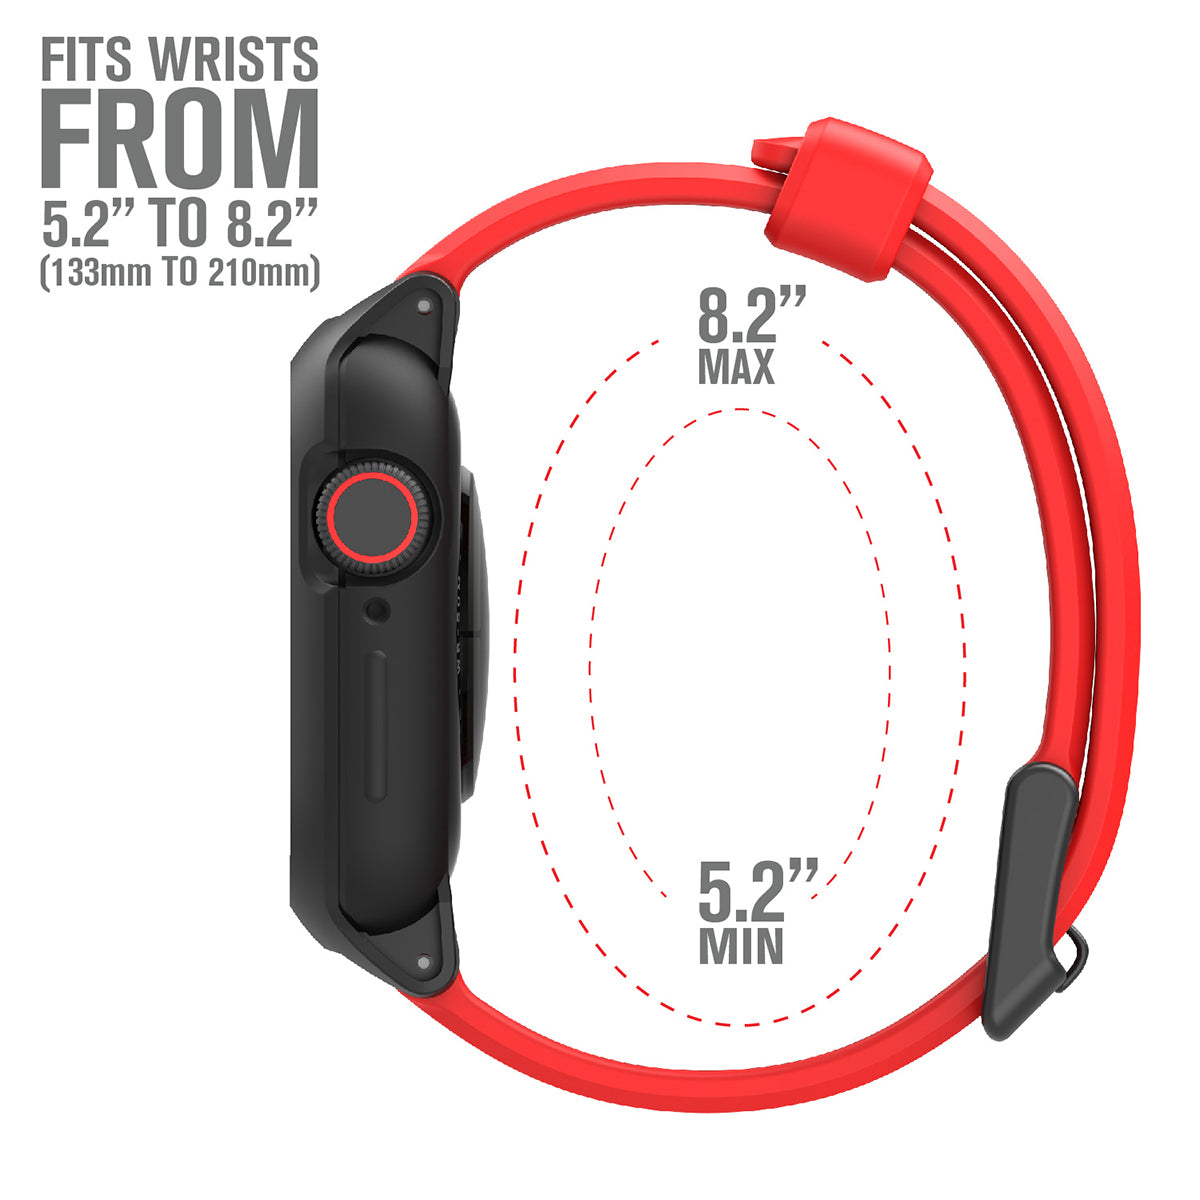 catalyst apple watch series 9 8 7 6 5 4 SE Gen 2 1 38 40 41mm sport band buckle edition side view of the case with the minimum and maximum sizes of the band flame red text reads fits wrists from 5.2" to 8.2"(133mm to 210mm)